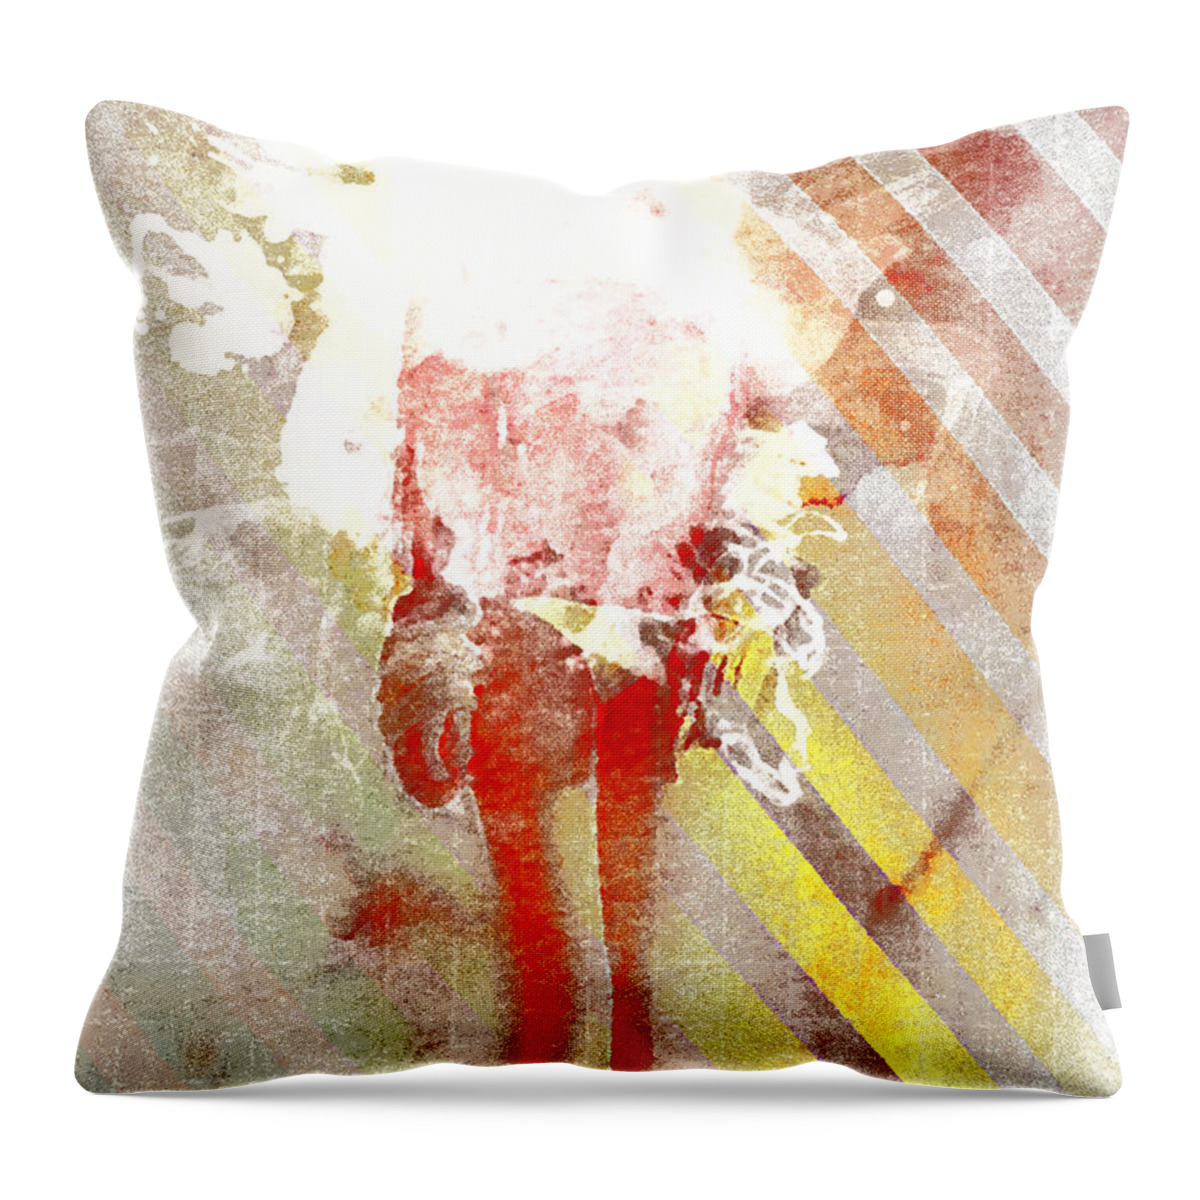 Woman Throw Pillow featuring the digital art Yellow Orange Stripes by Andrea Barbieri